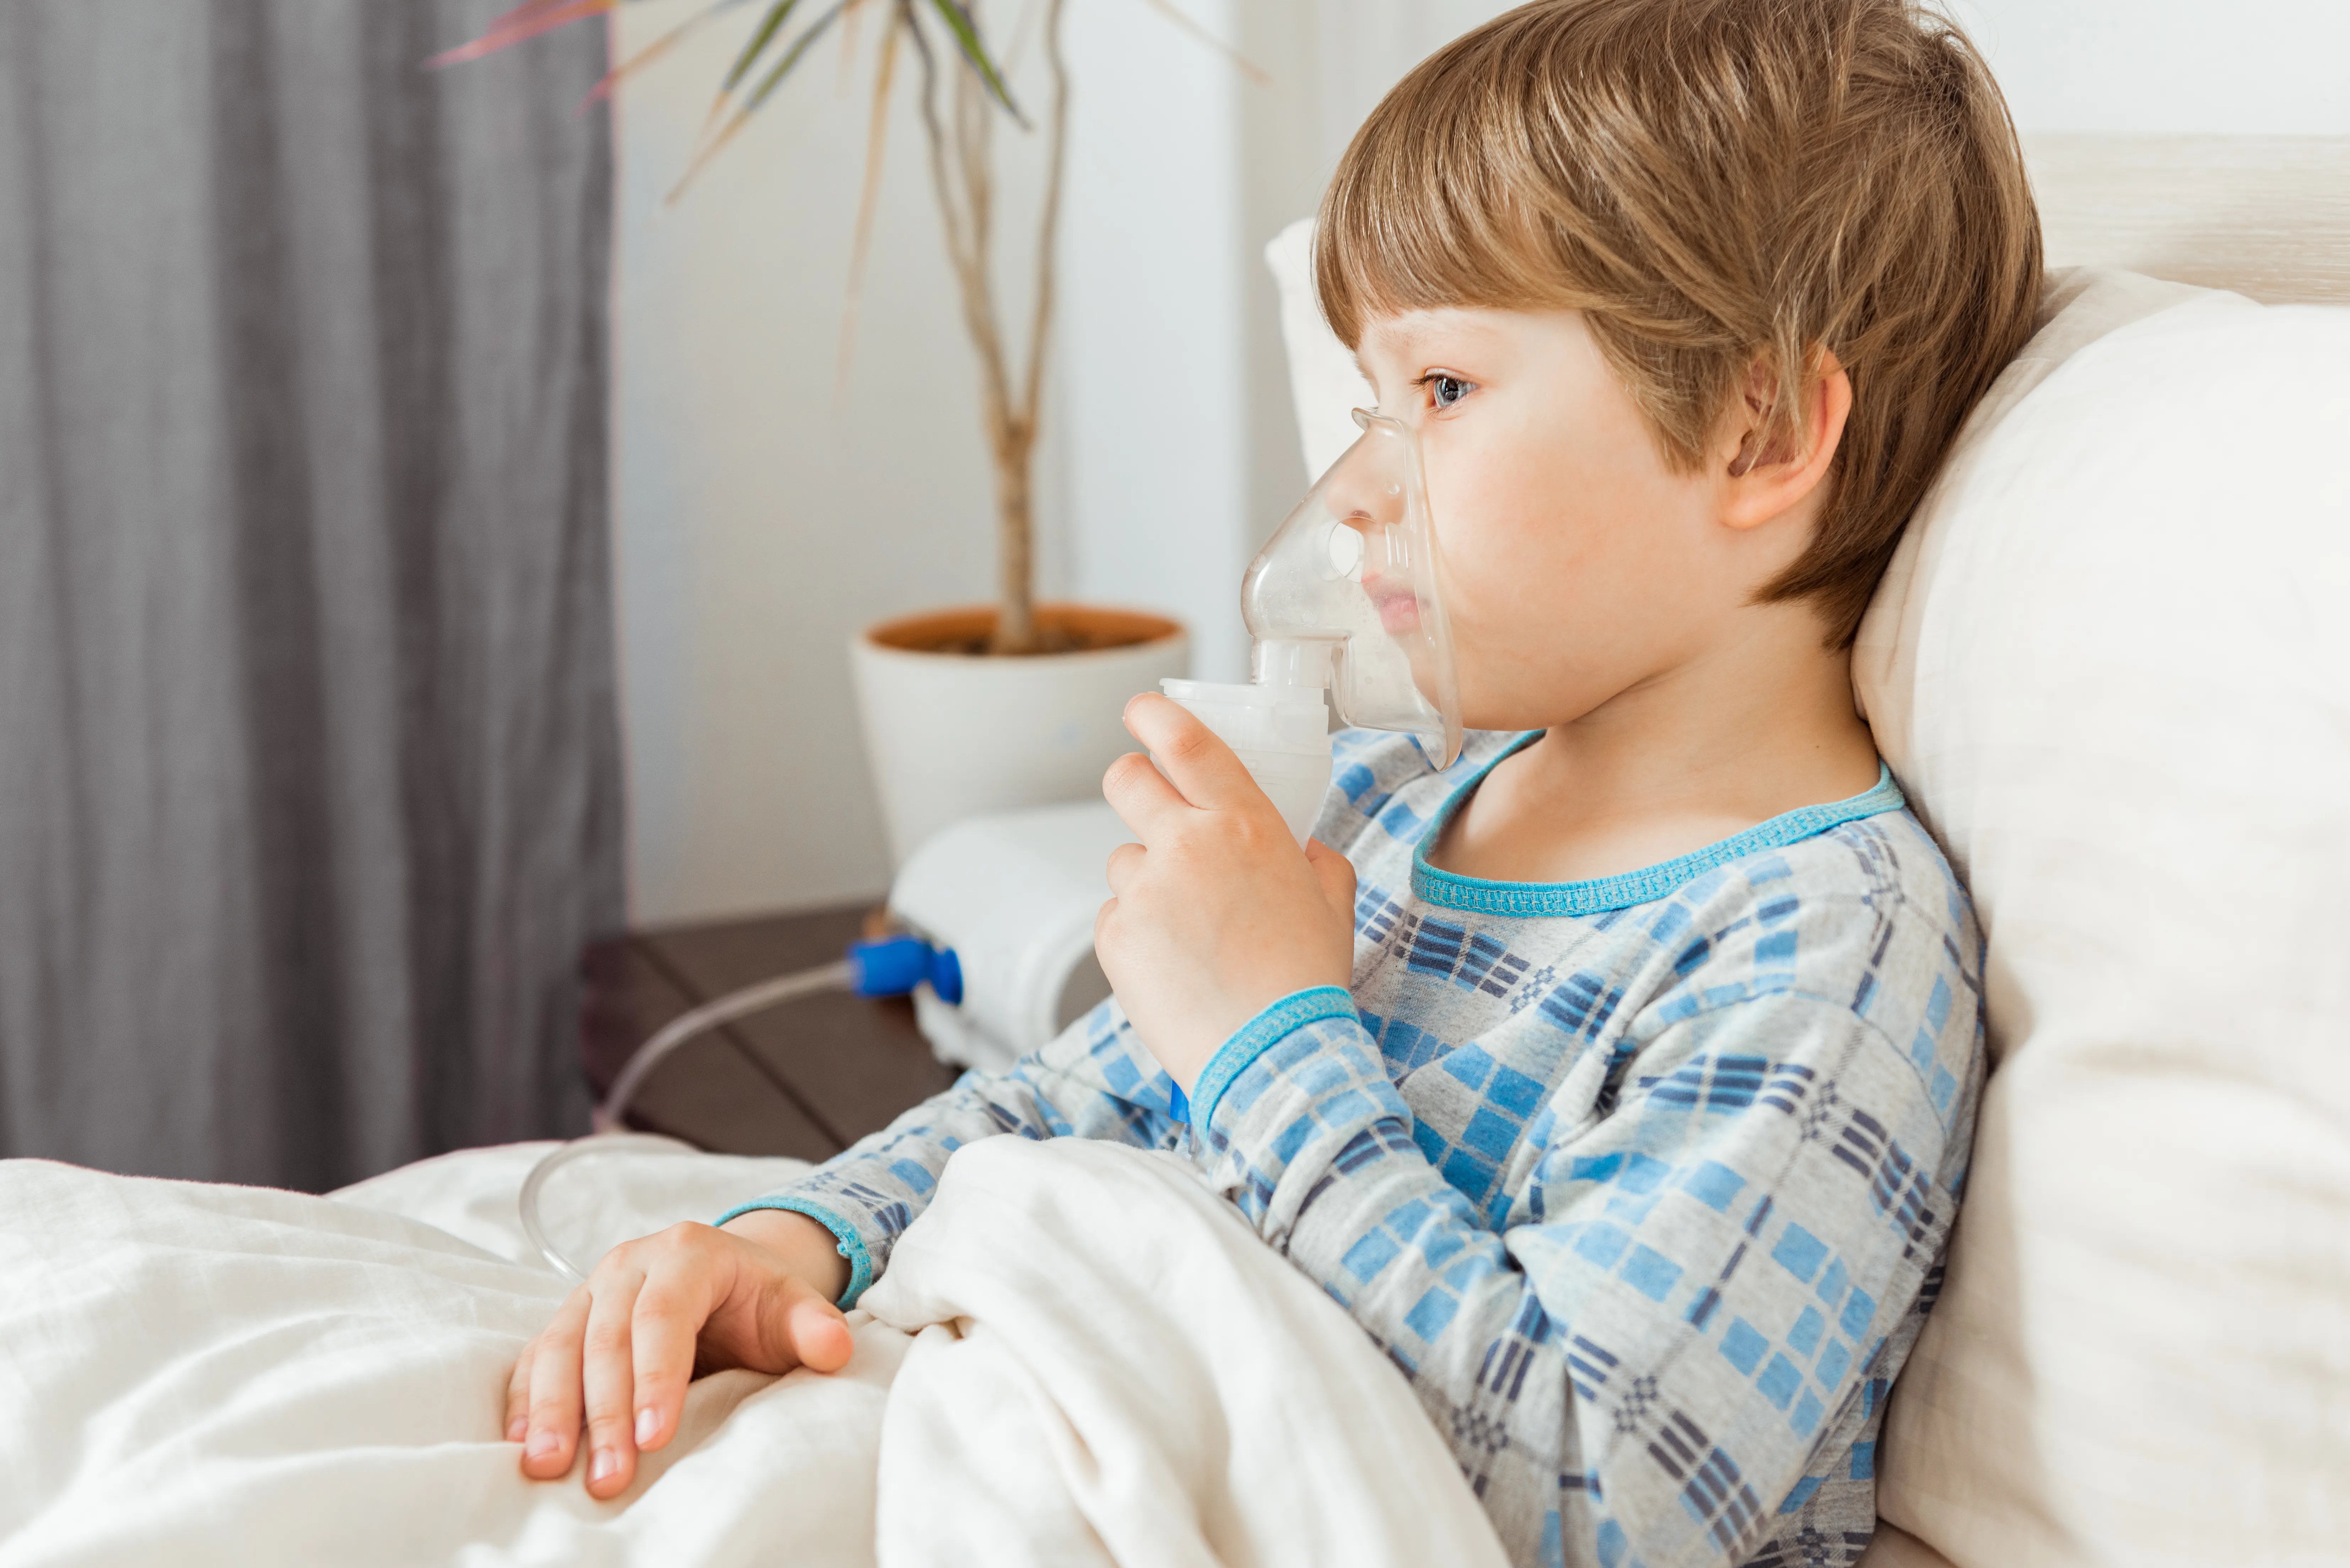 Does My Child Have Respiratory Syncytial Virus?